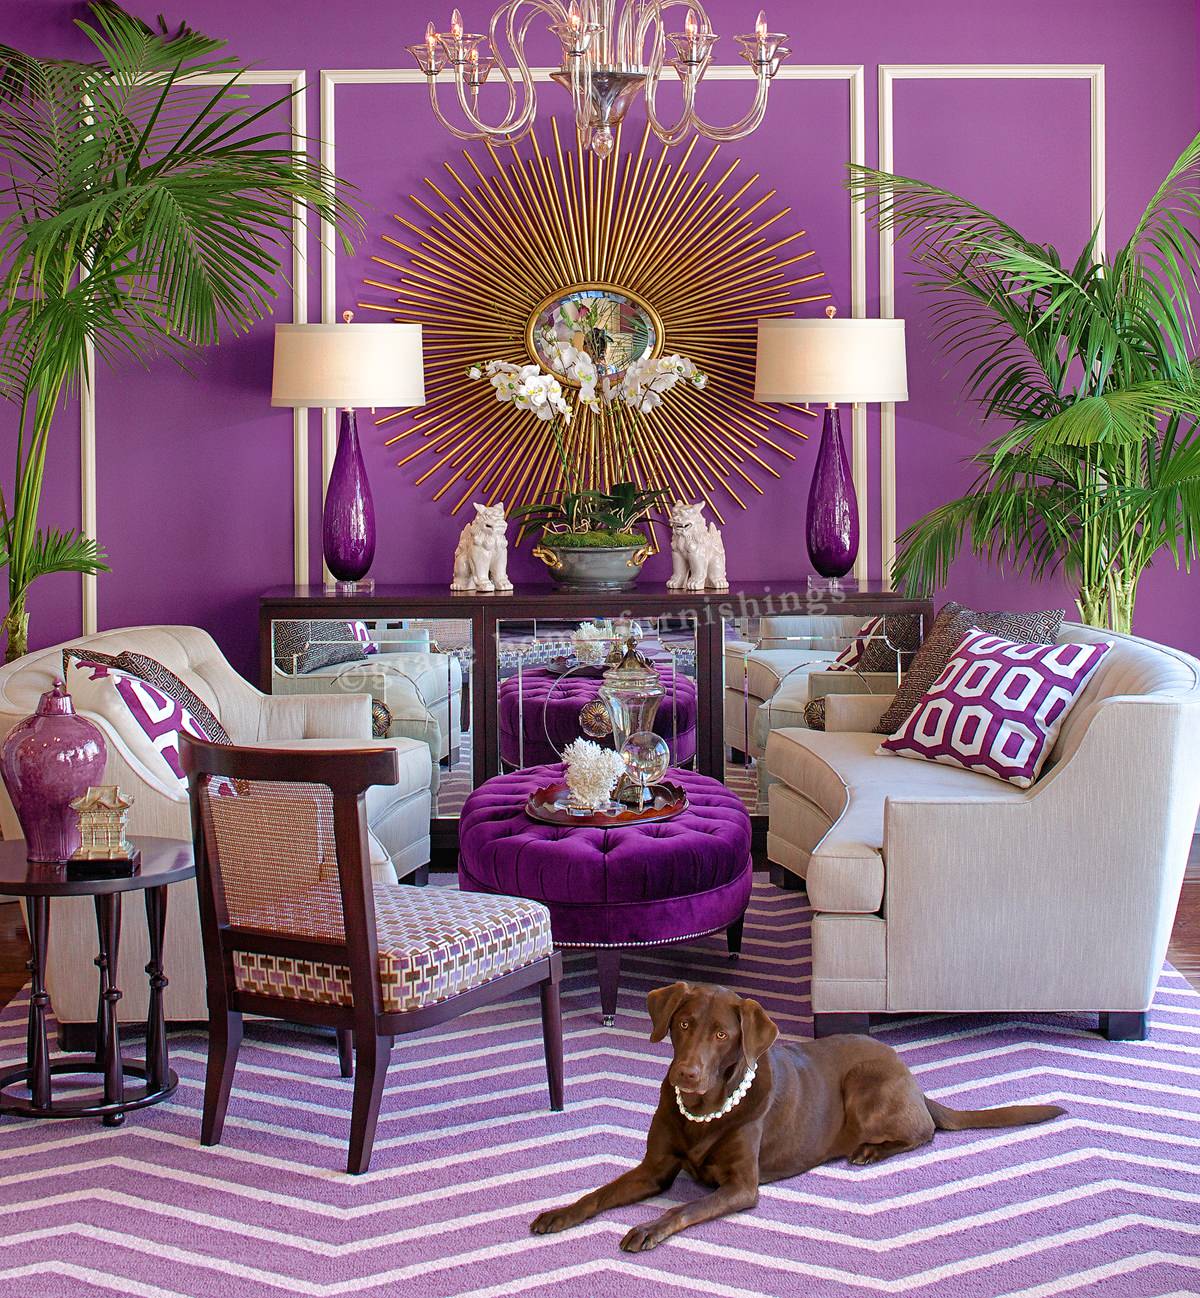 75 Beautiful Living Room With Purple Walls Pictures Ideas April 2021 Houzz